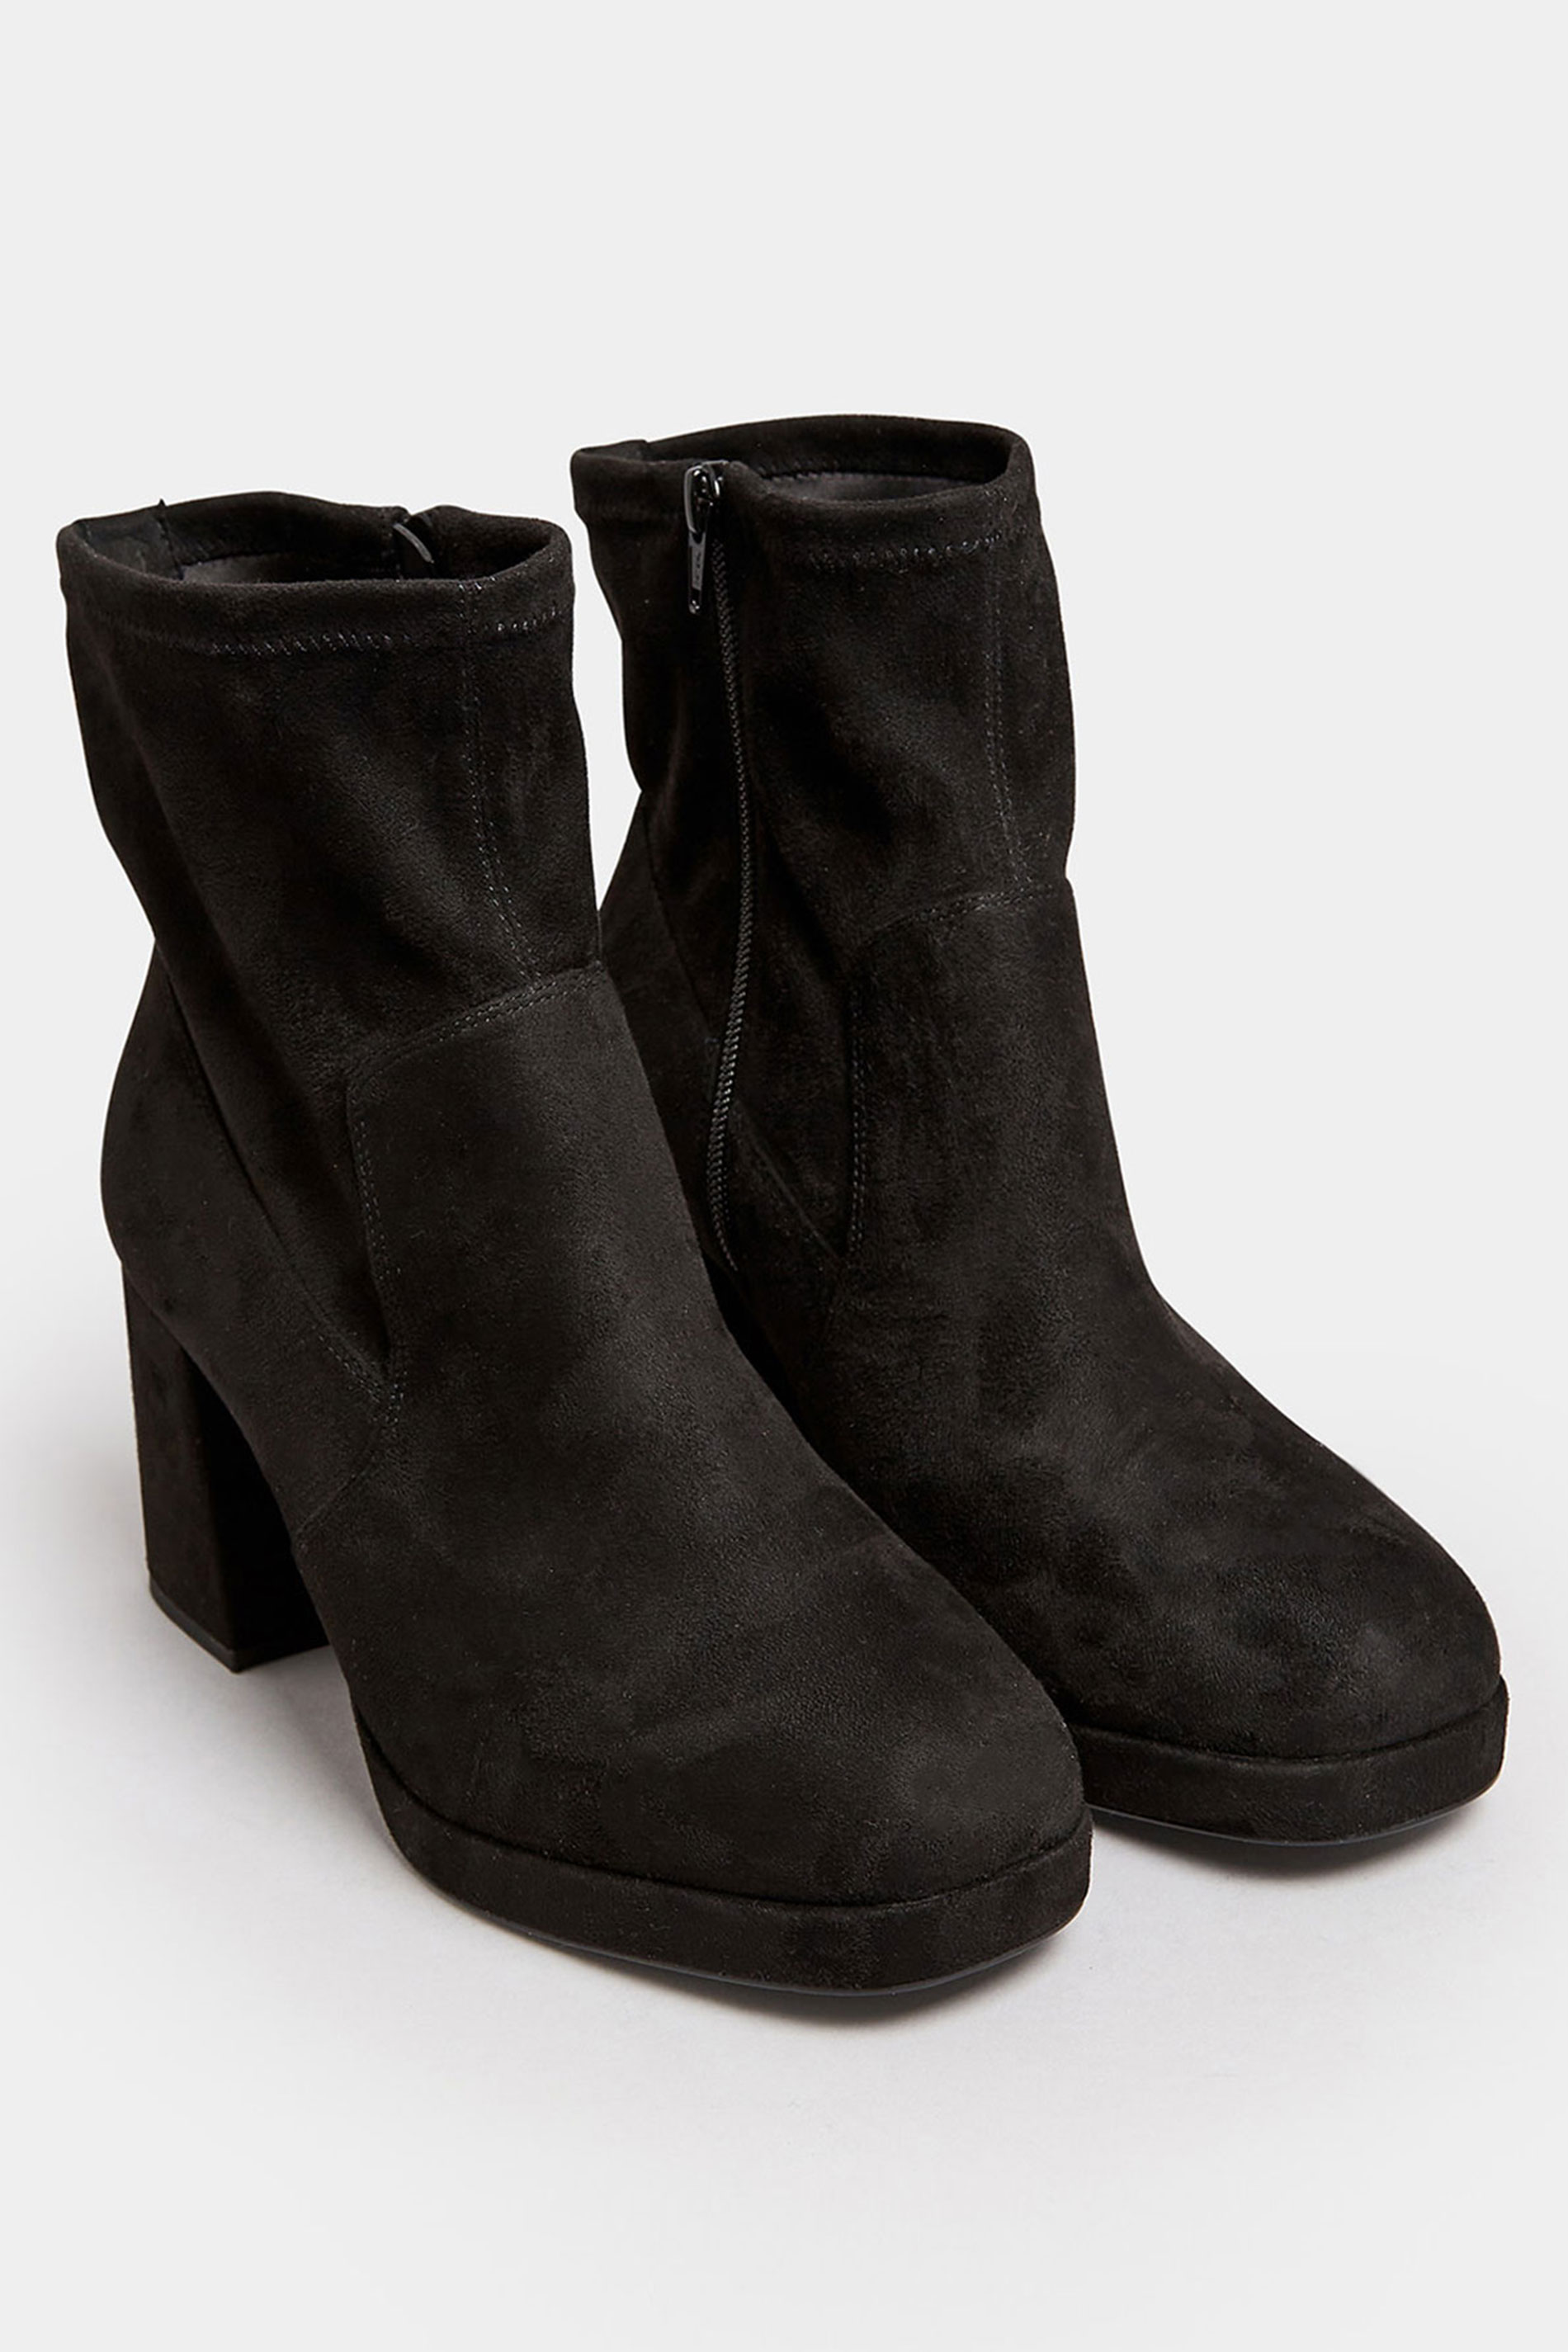 LIMITED COLLECTION Curve Black Platform Ankle Boots In Extra Wide EEE Fit | Yours Clothing  2